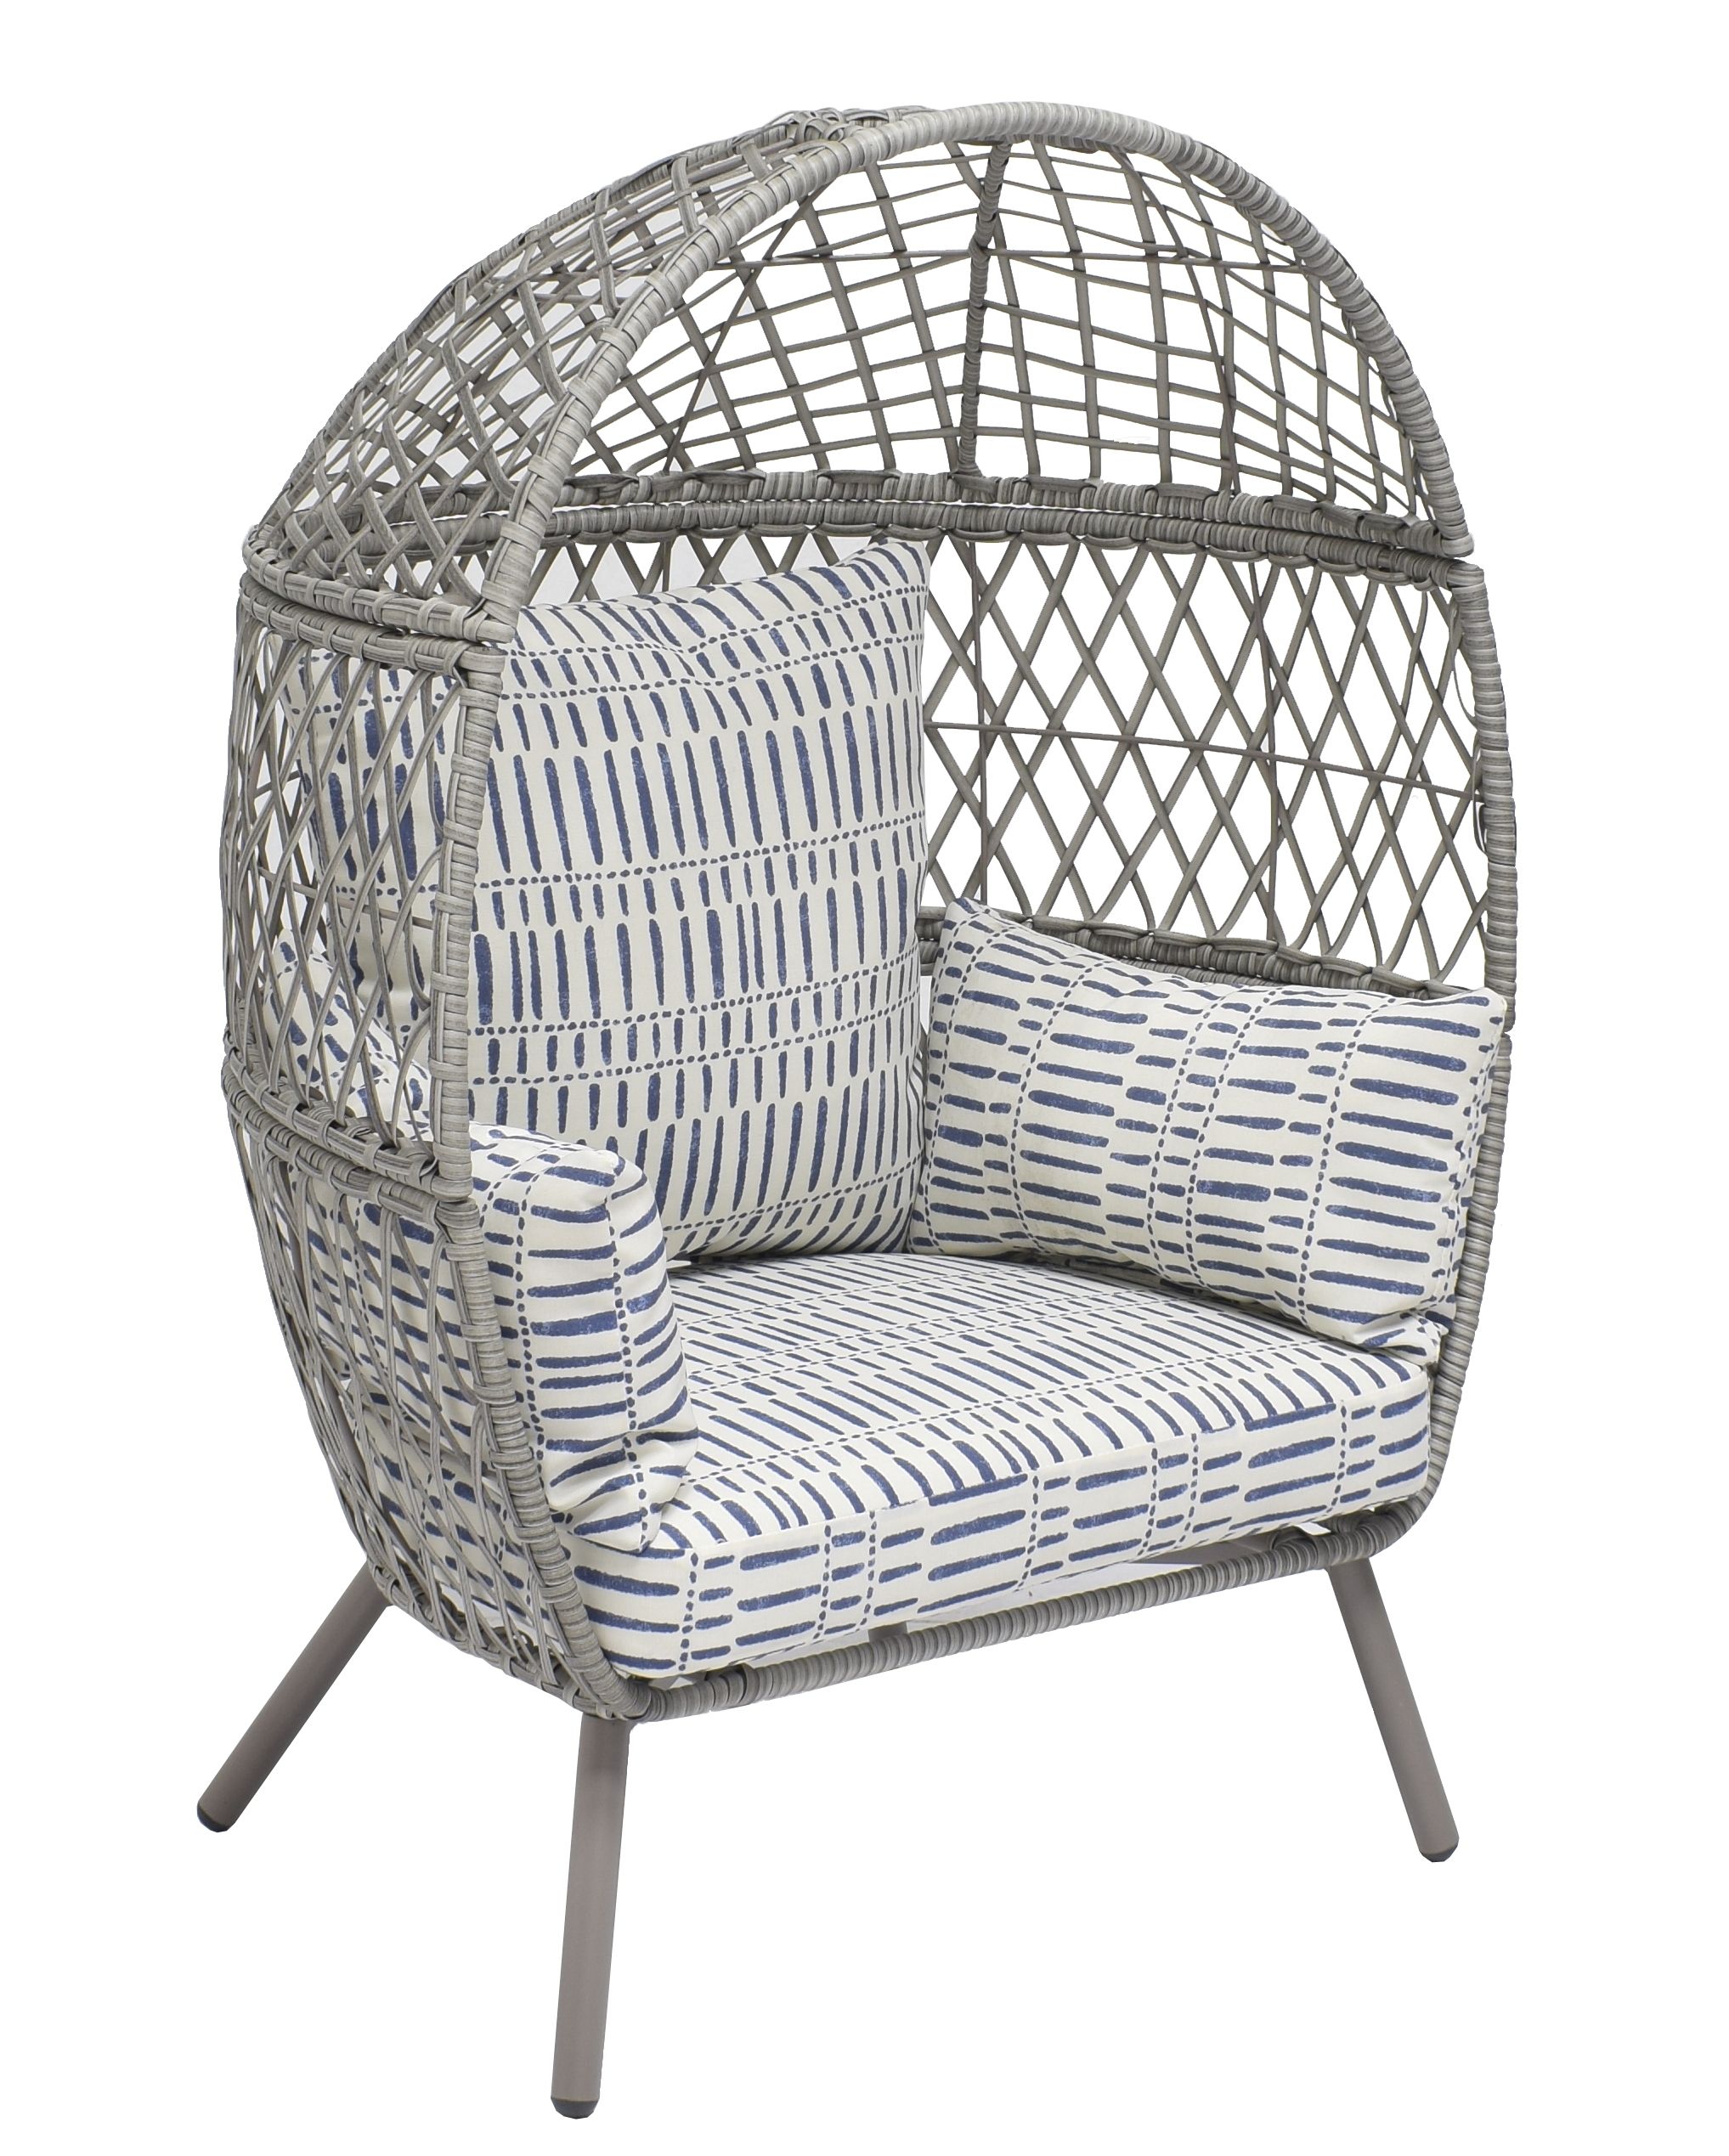 Better Homes & Gardens Kid's Ventura Outdoor Stationary Wicker Woven Egg Chair, Gray - image 2 of 7